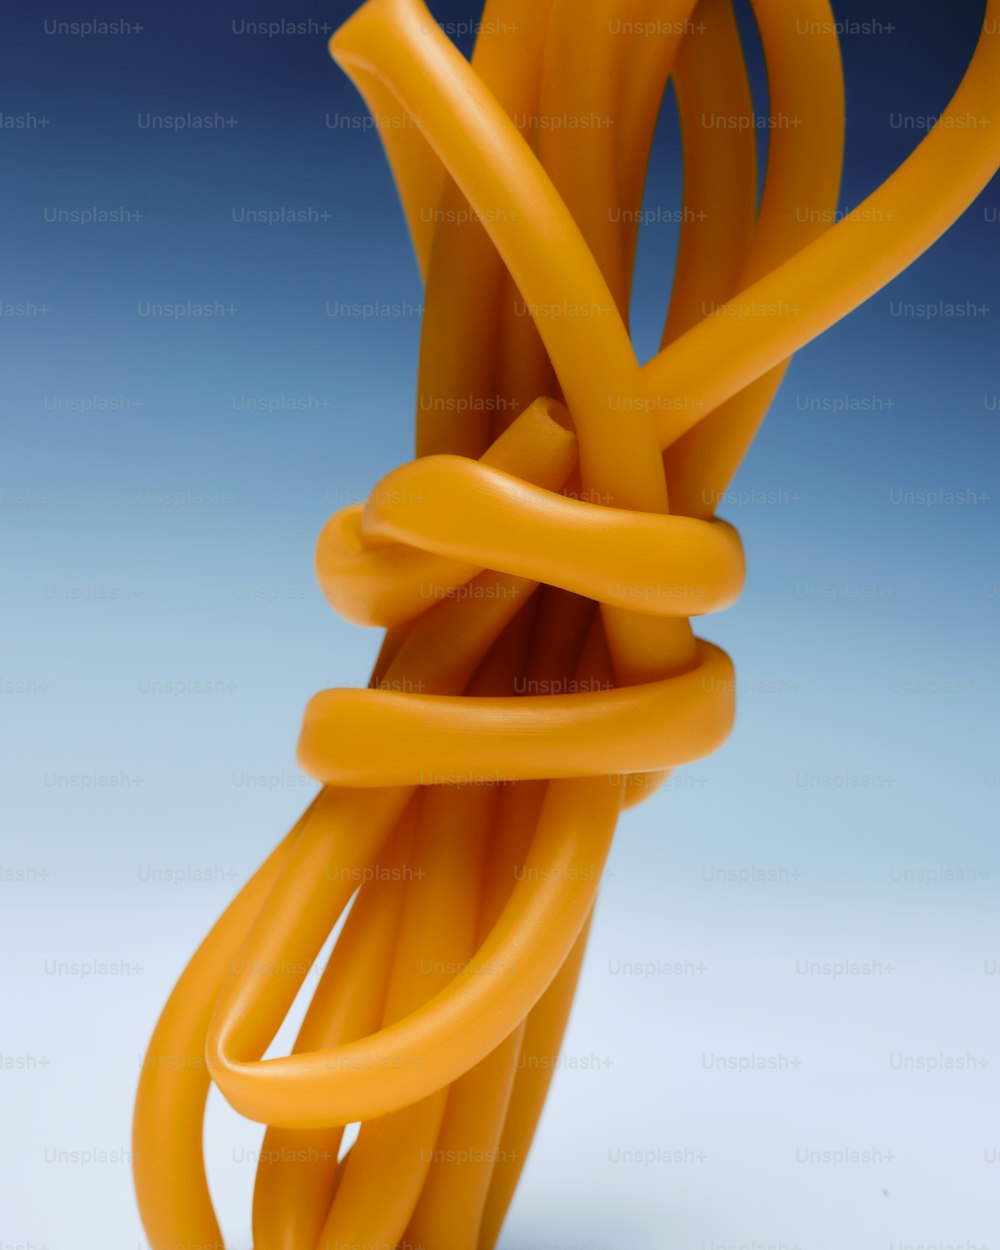 a close up of a bunch of yellow cords